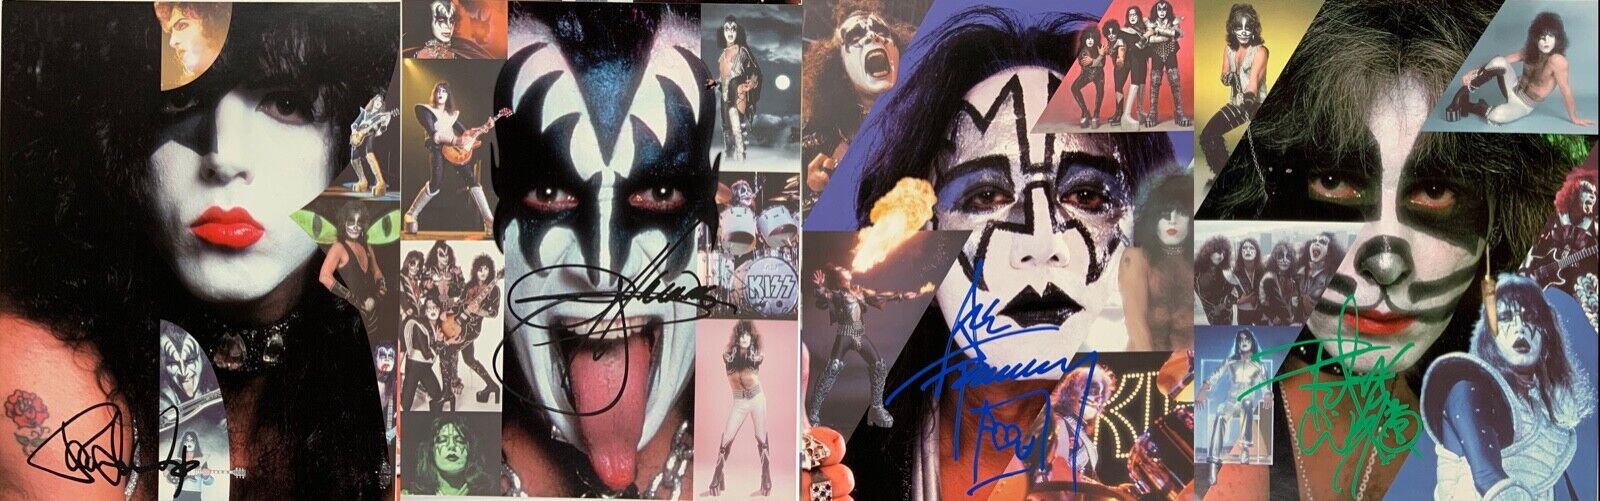 KISS Signed Autograph Photo Poster paintings Paul Stanley Gene Simmons Ace Peter Epperson JSA